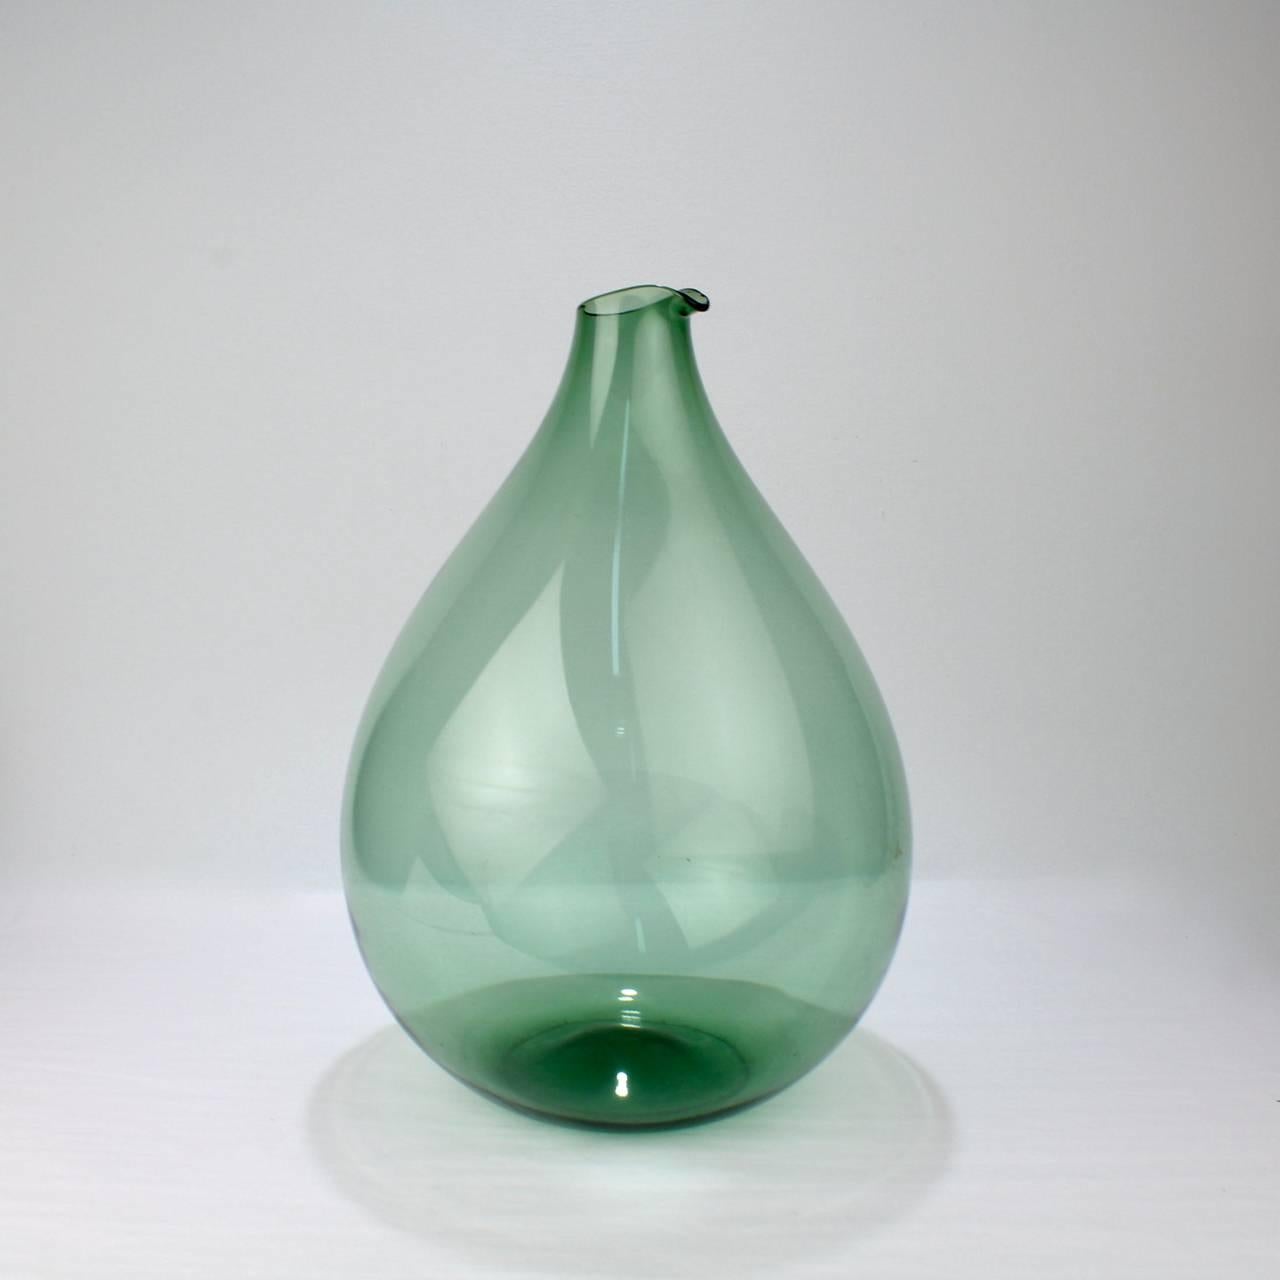 A fine and large scale Bomkulla jug by Kjell Blömberg in green.

Designed for Gullaskruf in the early 1960s.

Height: ca. 14 1/2 in.

Interior retains some persistent light spotting and mineral stains from water.

Items purchased from David